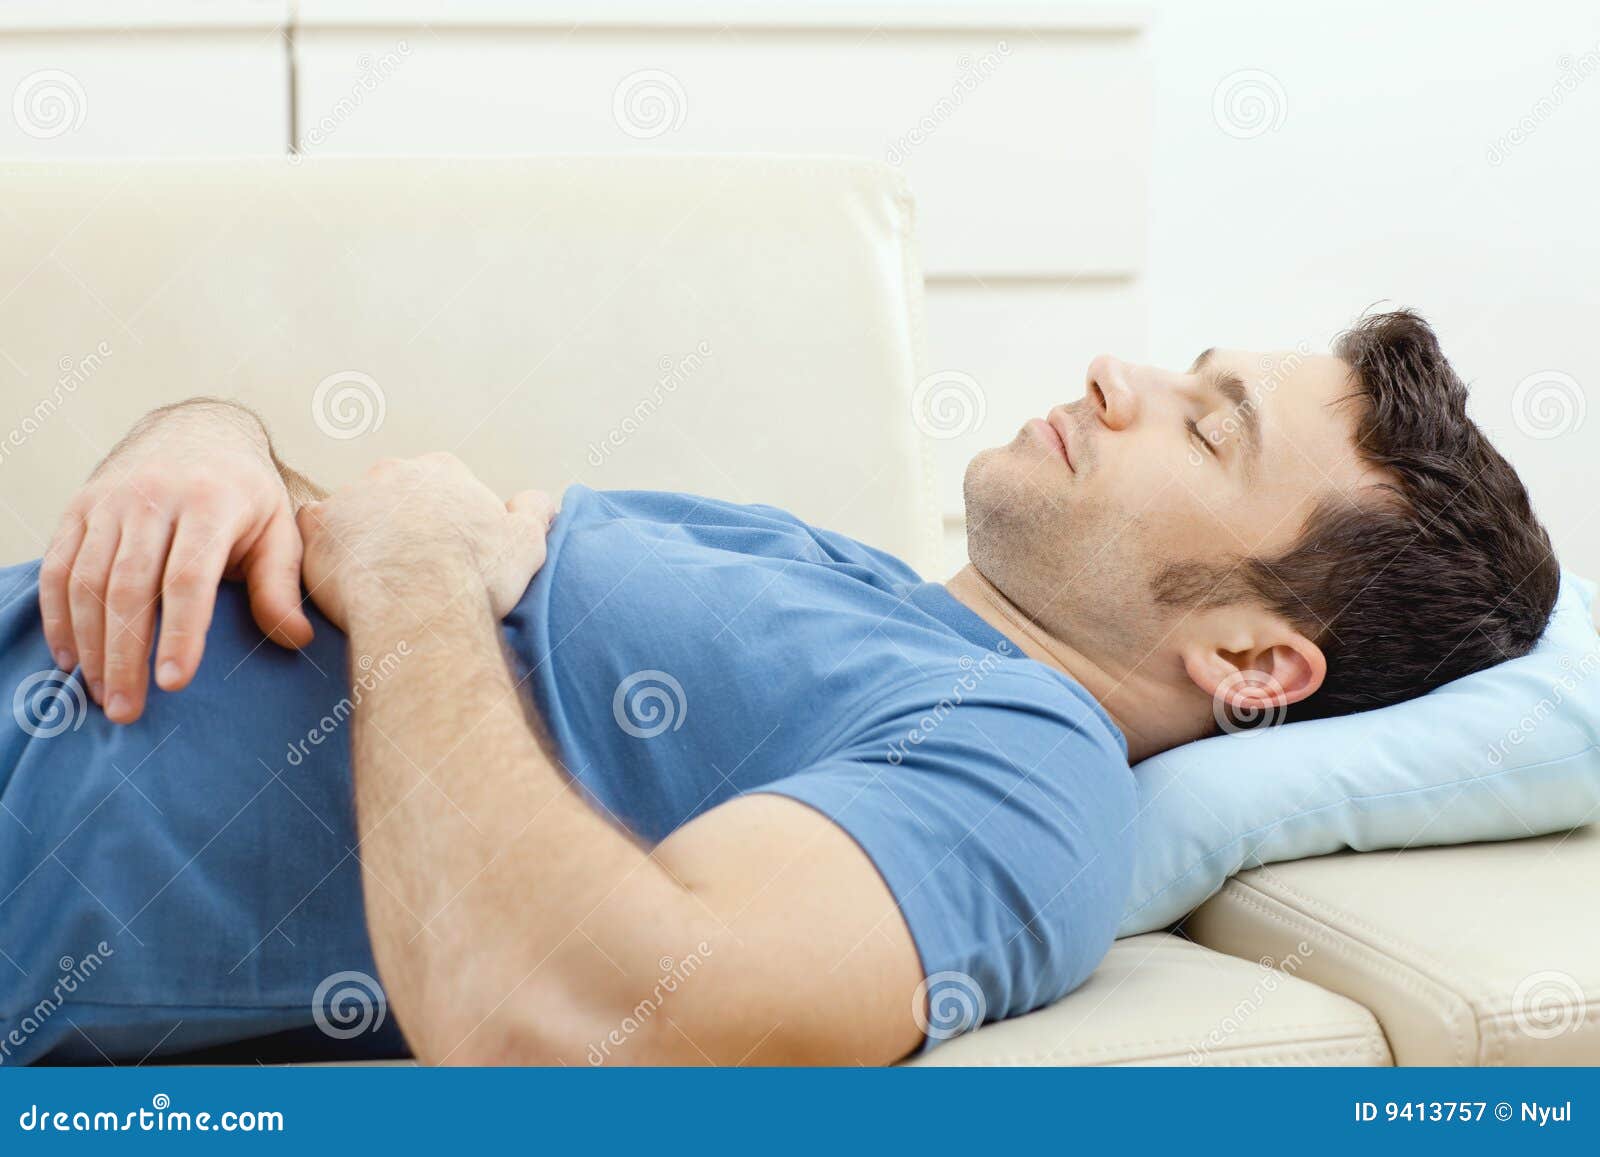 man sleeping on couch